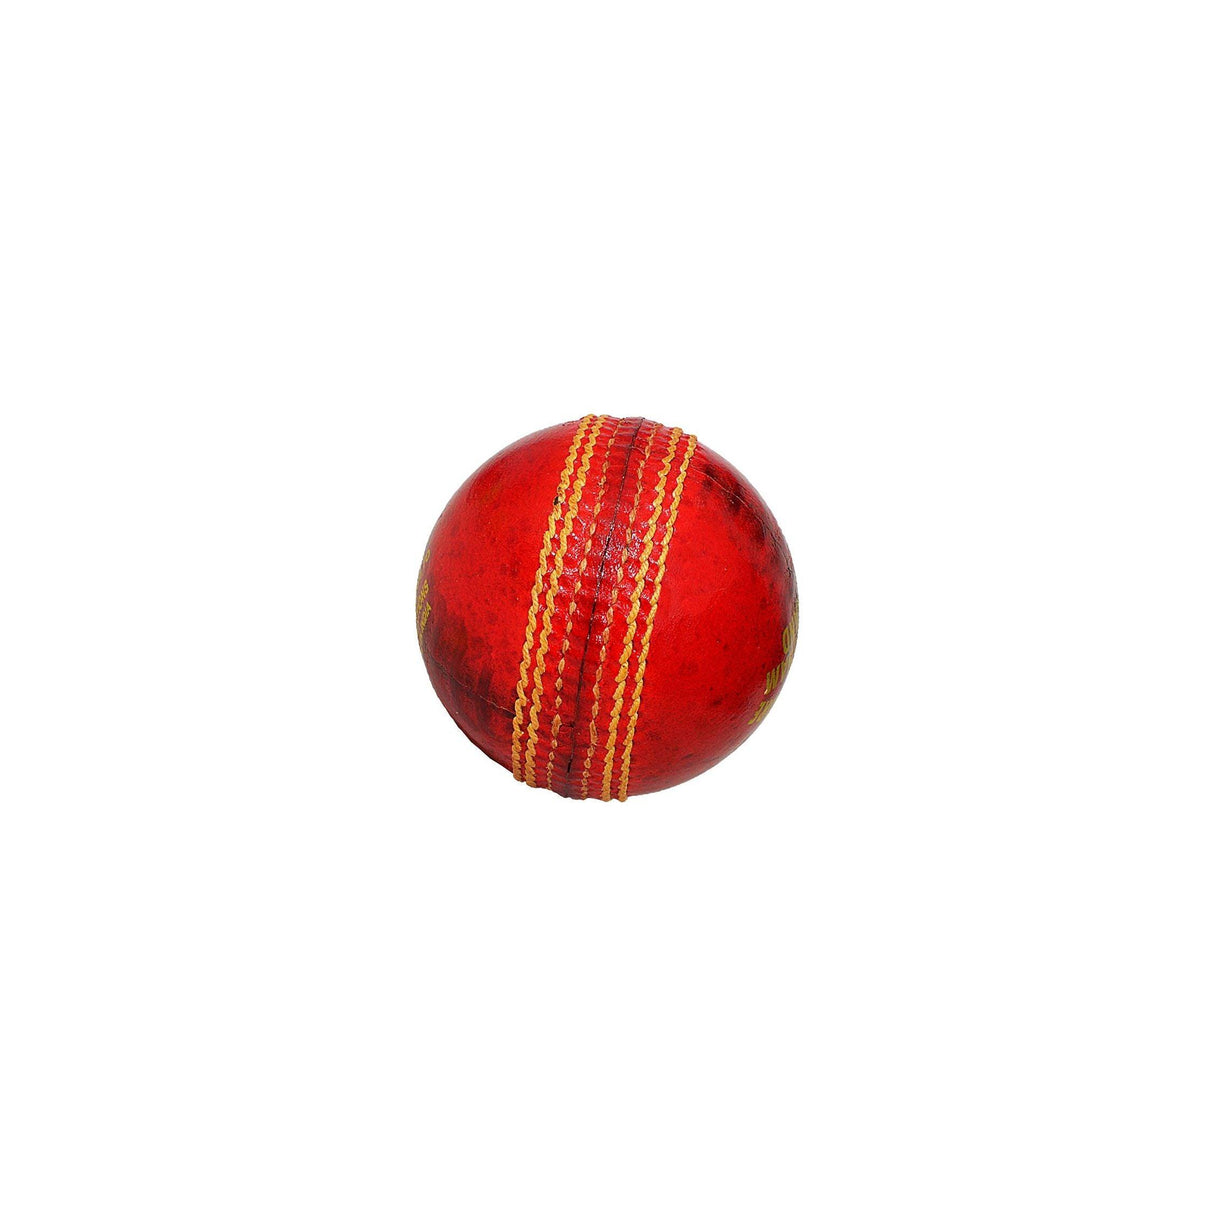 GM Super County Leather Cricket Ball (Red) - Mill Sports 